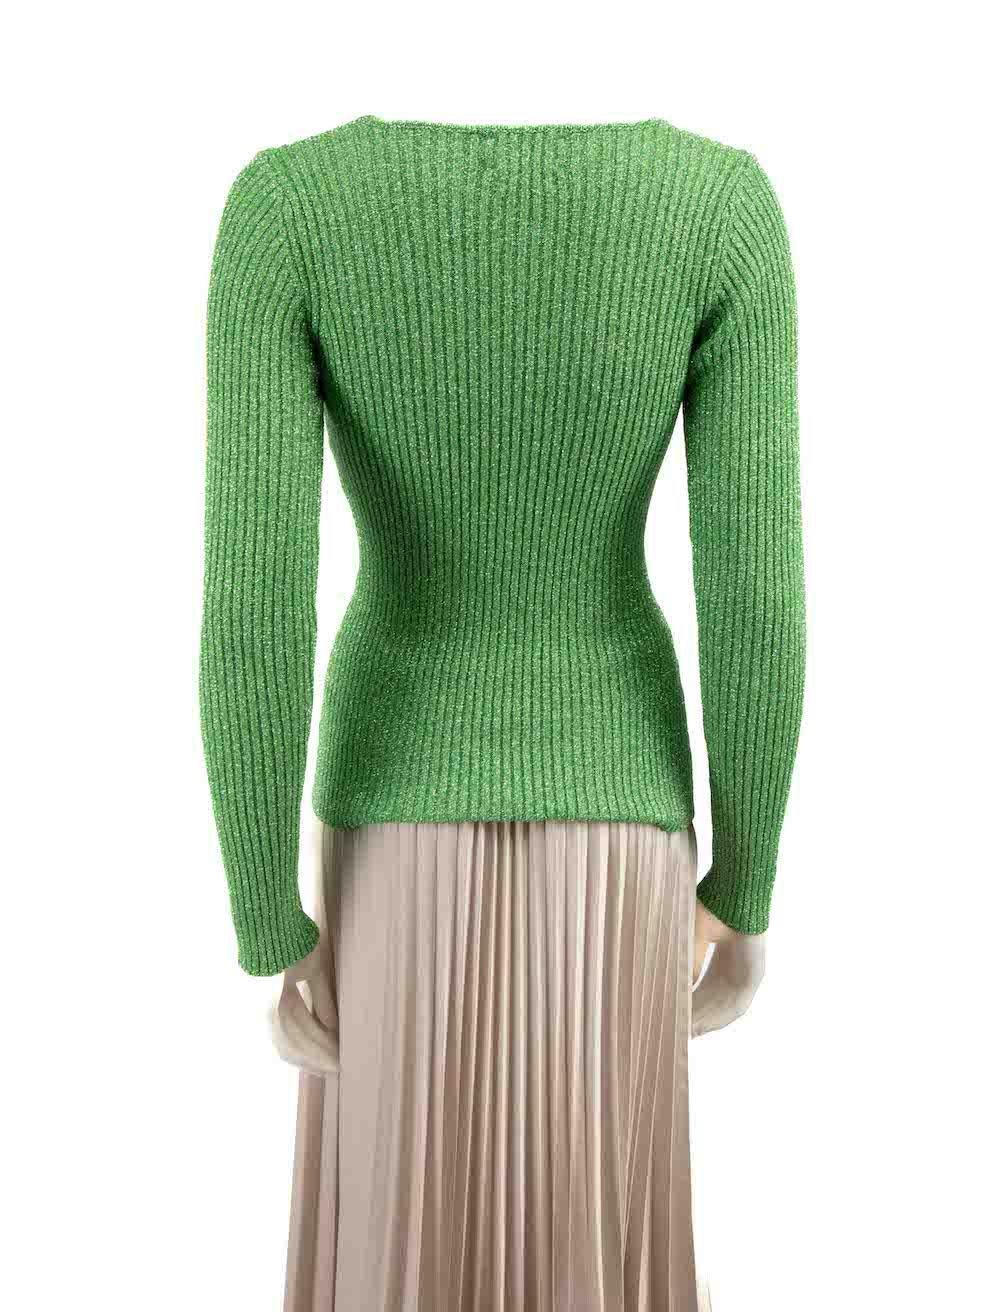 Ganni Green Glitter Ribbed Knit Top Size XS In Good Condition For Sale In London, GB